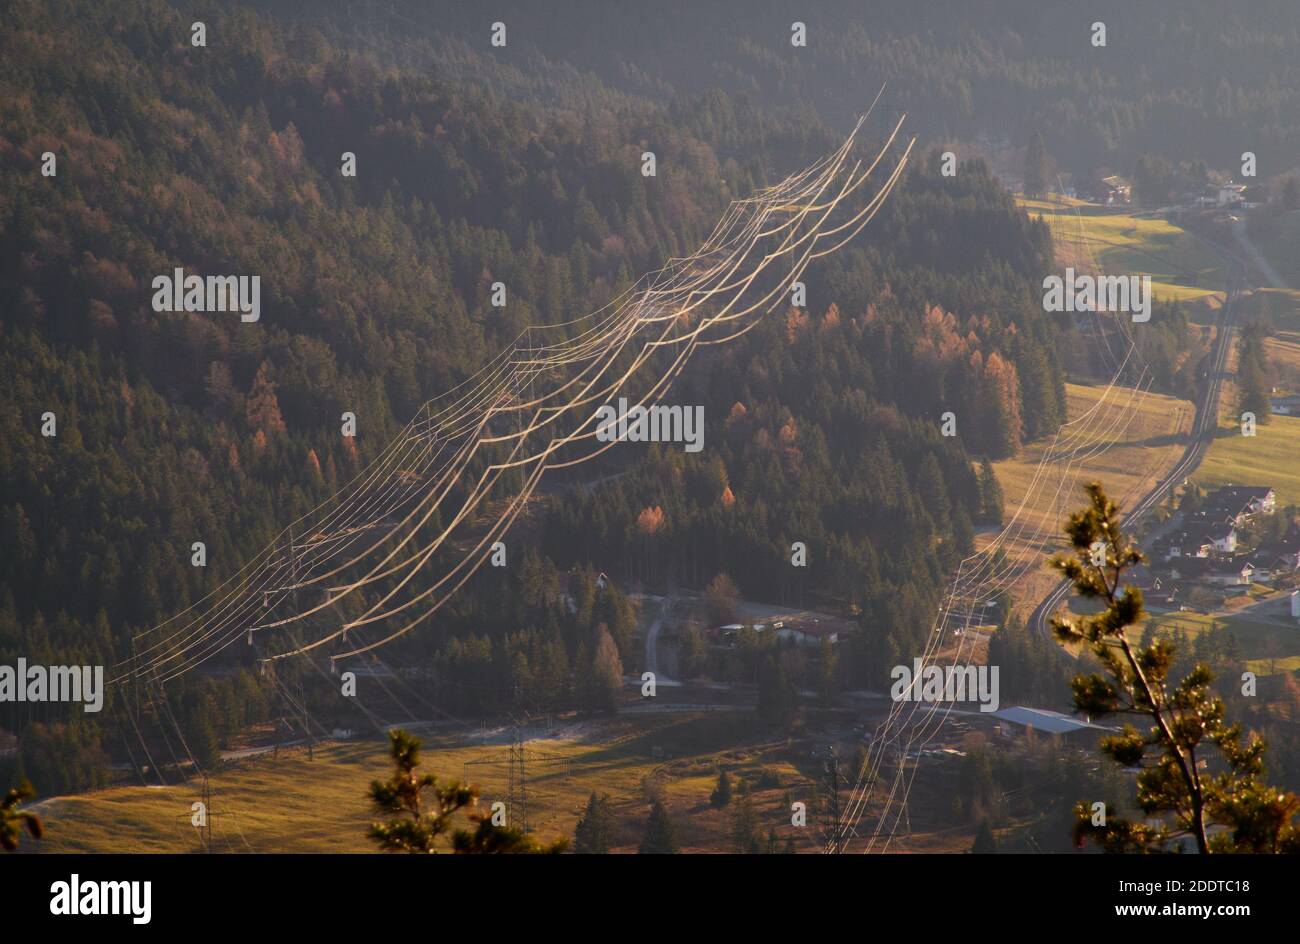 Reutte, Tyrol, Austria, November 26, 2020.  Electricity power lines of the Reutte power supply with electricity pylons with surrounding landscape of the Lechtal valley and the Alps. © Peter Schatz / Alamy Live News Stock Photo